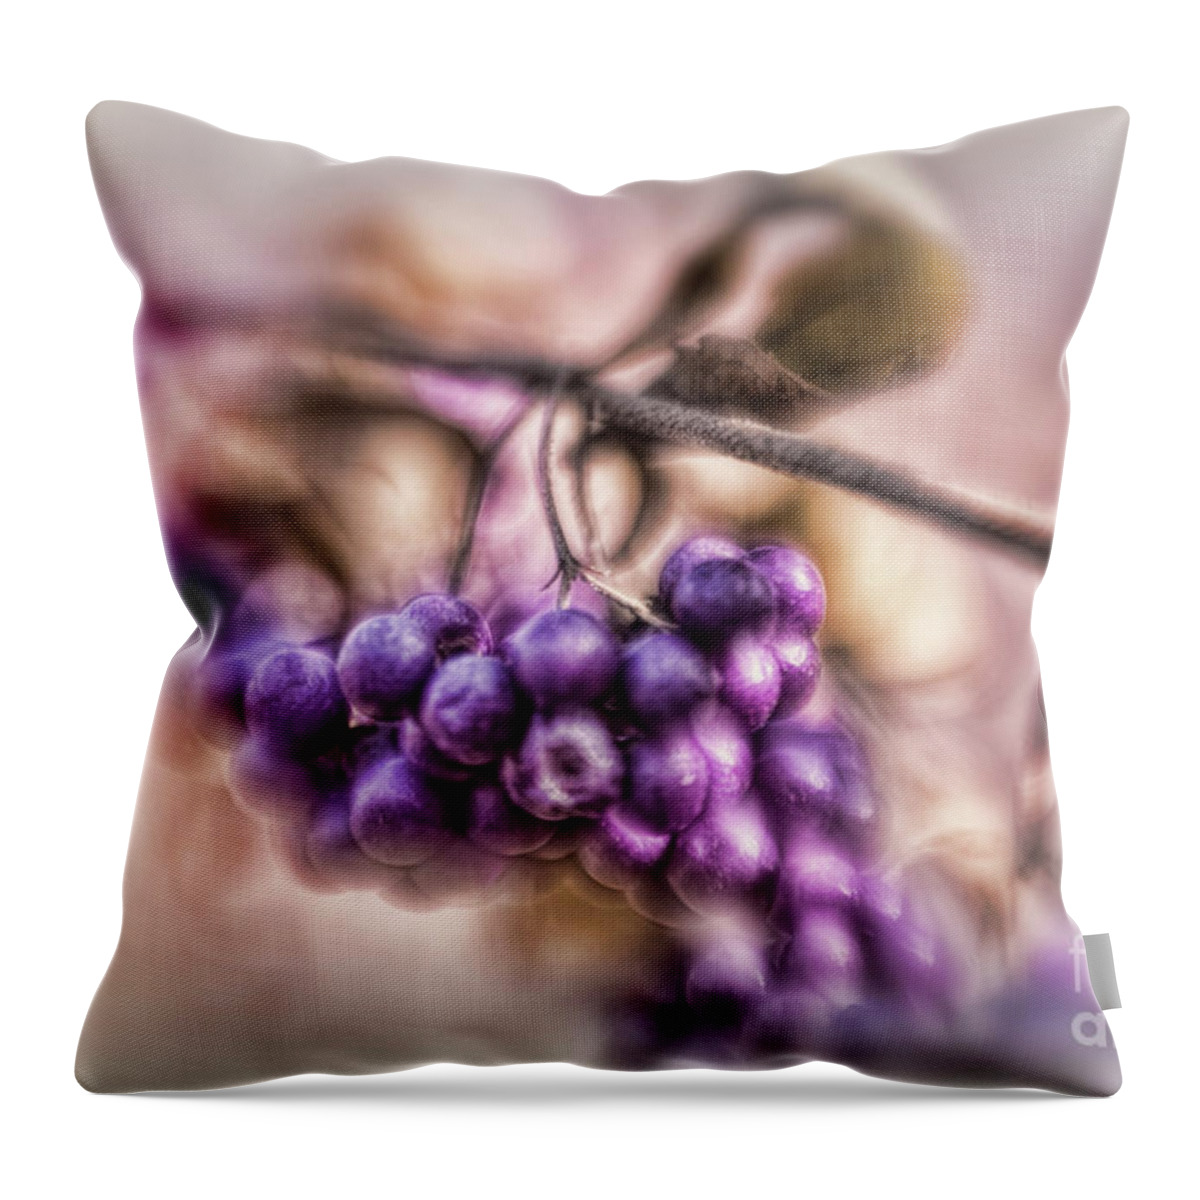 Purple Berries Found In The Fall Throw Pillow featuring the photograph The American Beautyberry by Mary Lou Chmura